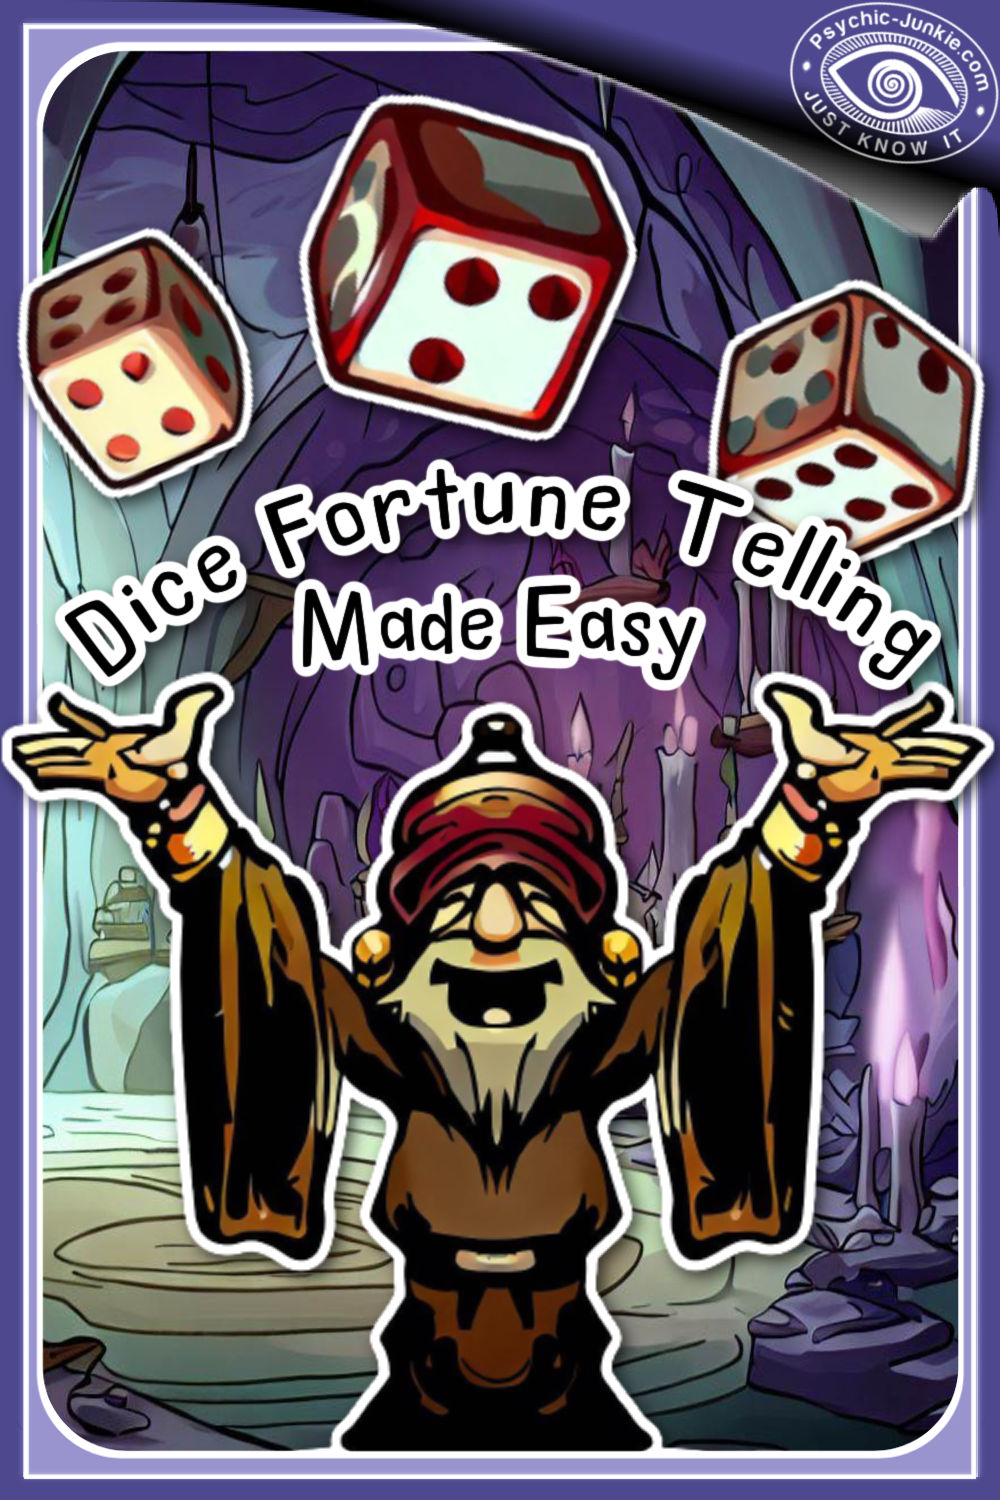 Easy Fortune Telling With Dice